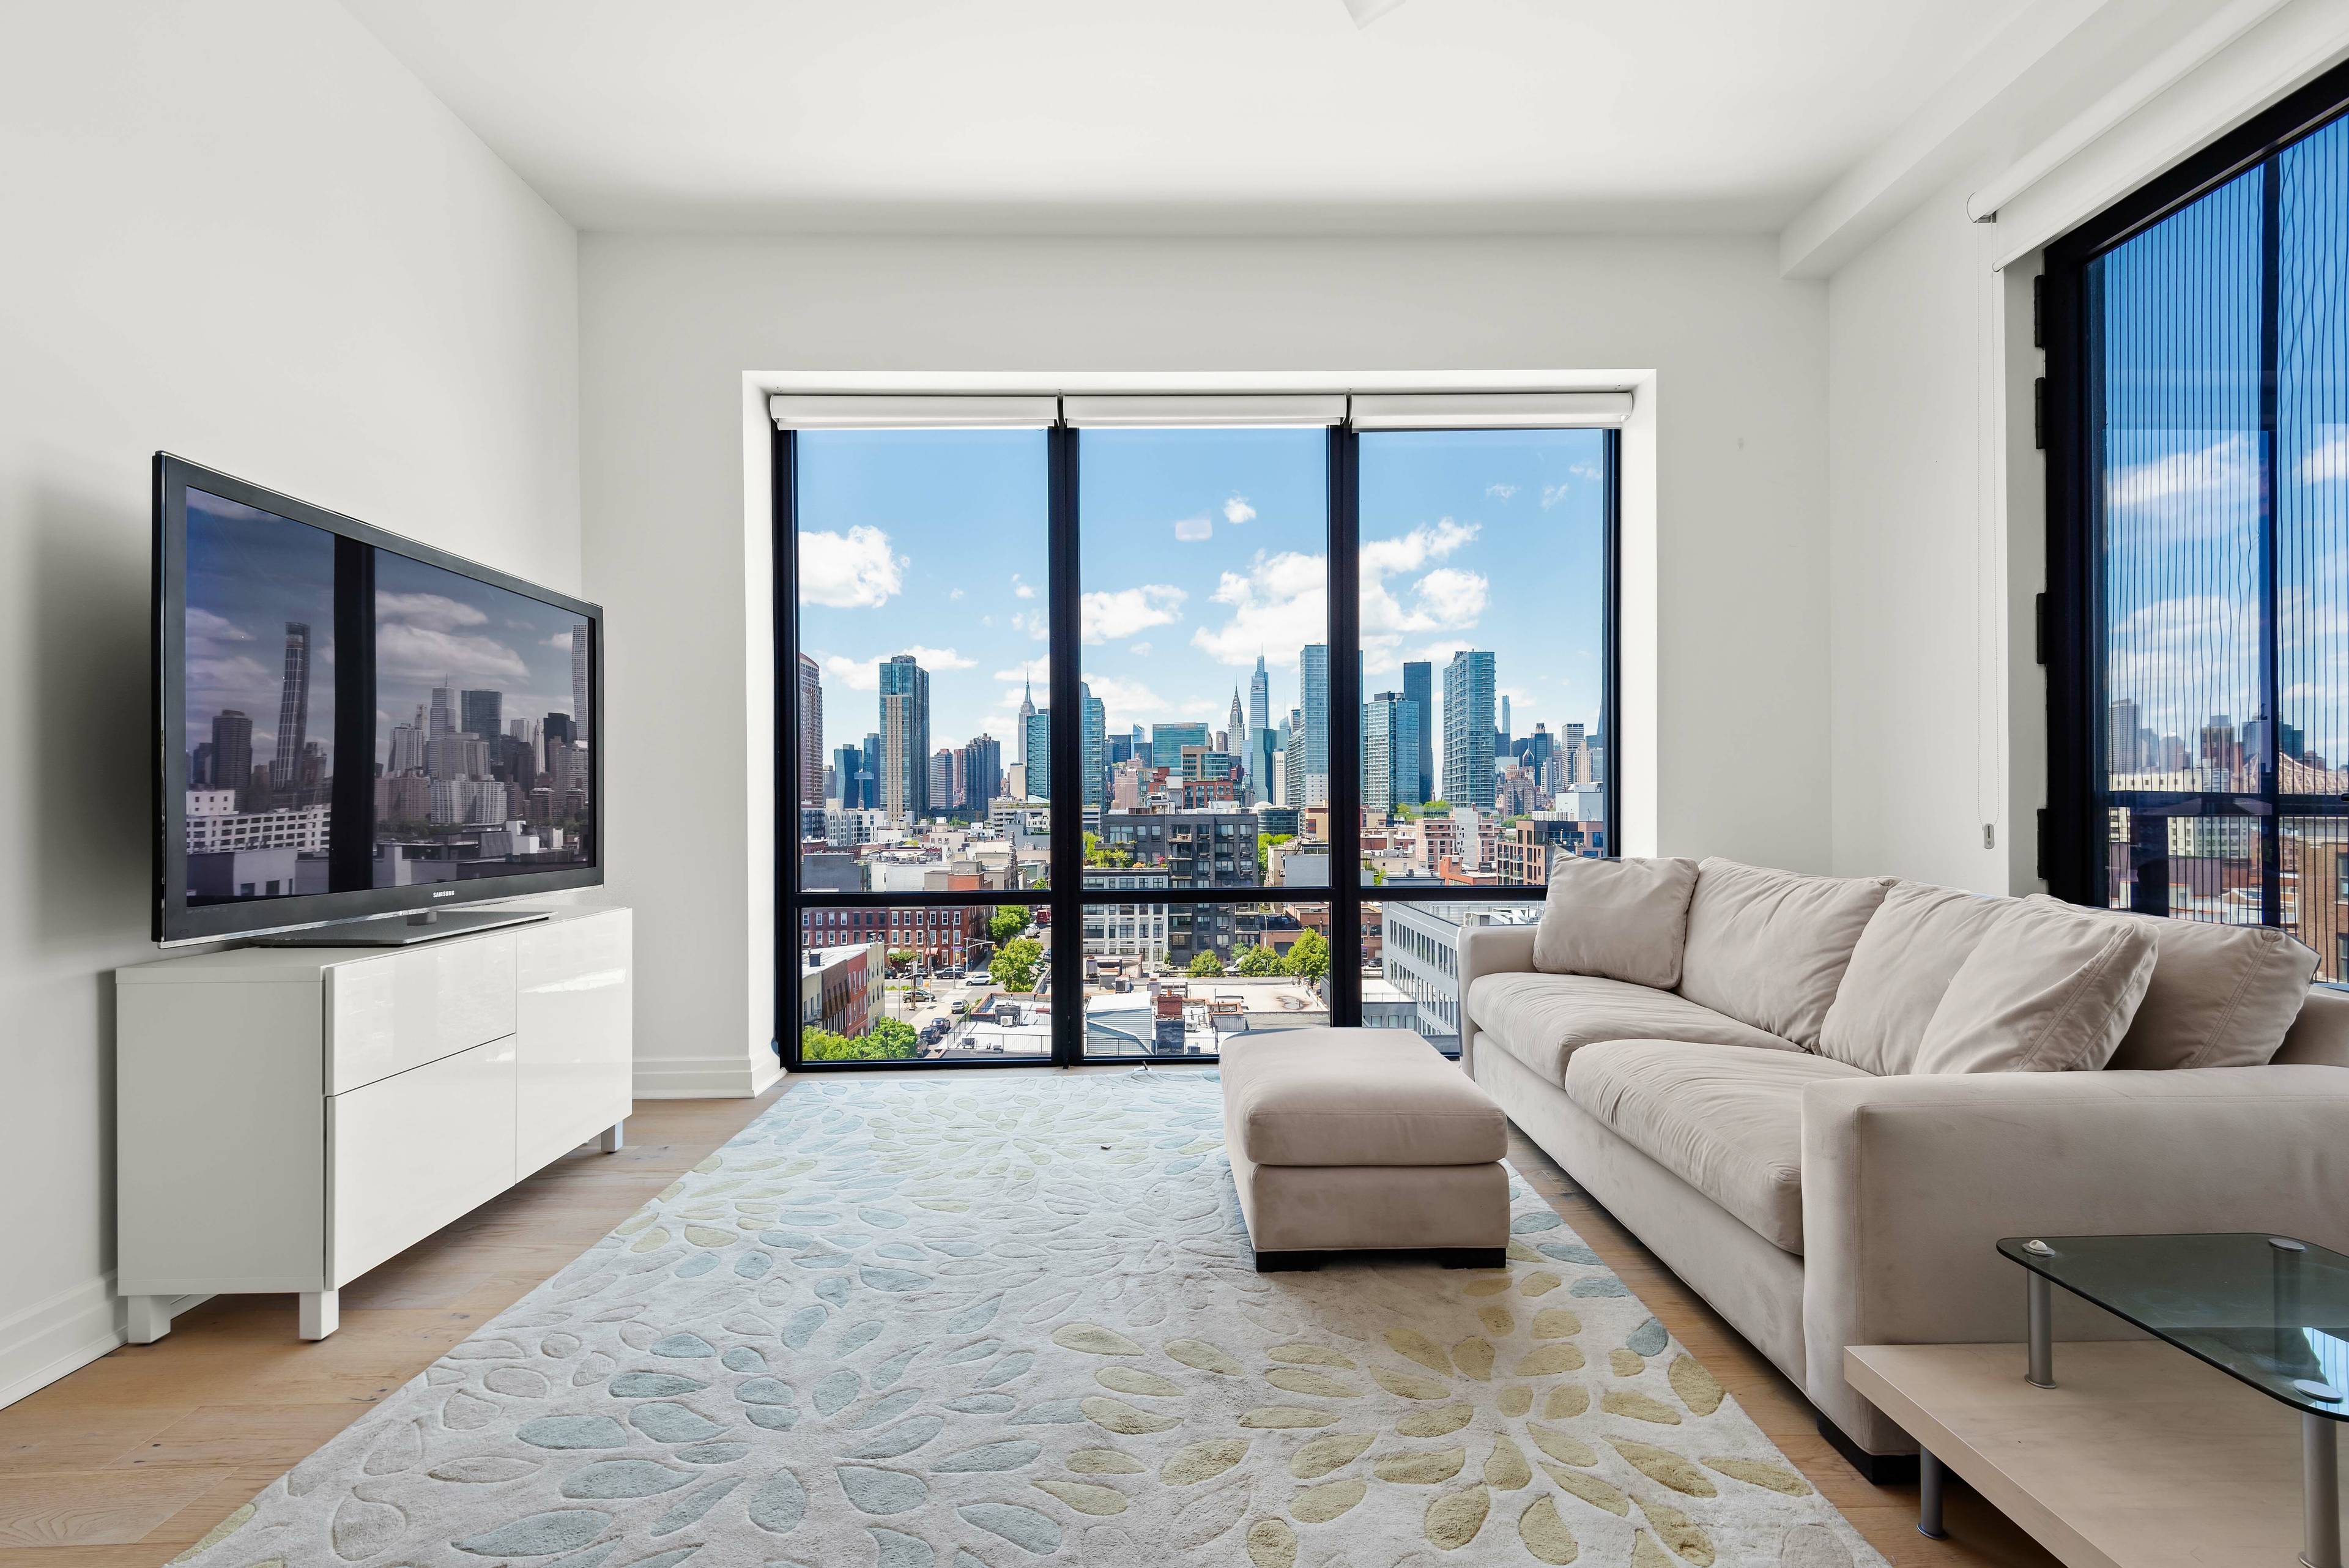 An immaculate corner condo with picturesque Manhattan views and private outdoor space, this 2 bedroom, 2 bathroom home is a paradigm of modern Long Island City living.